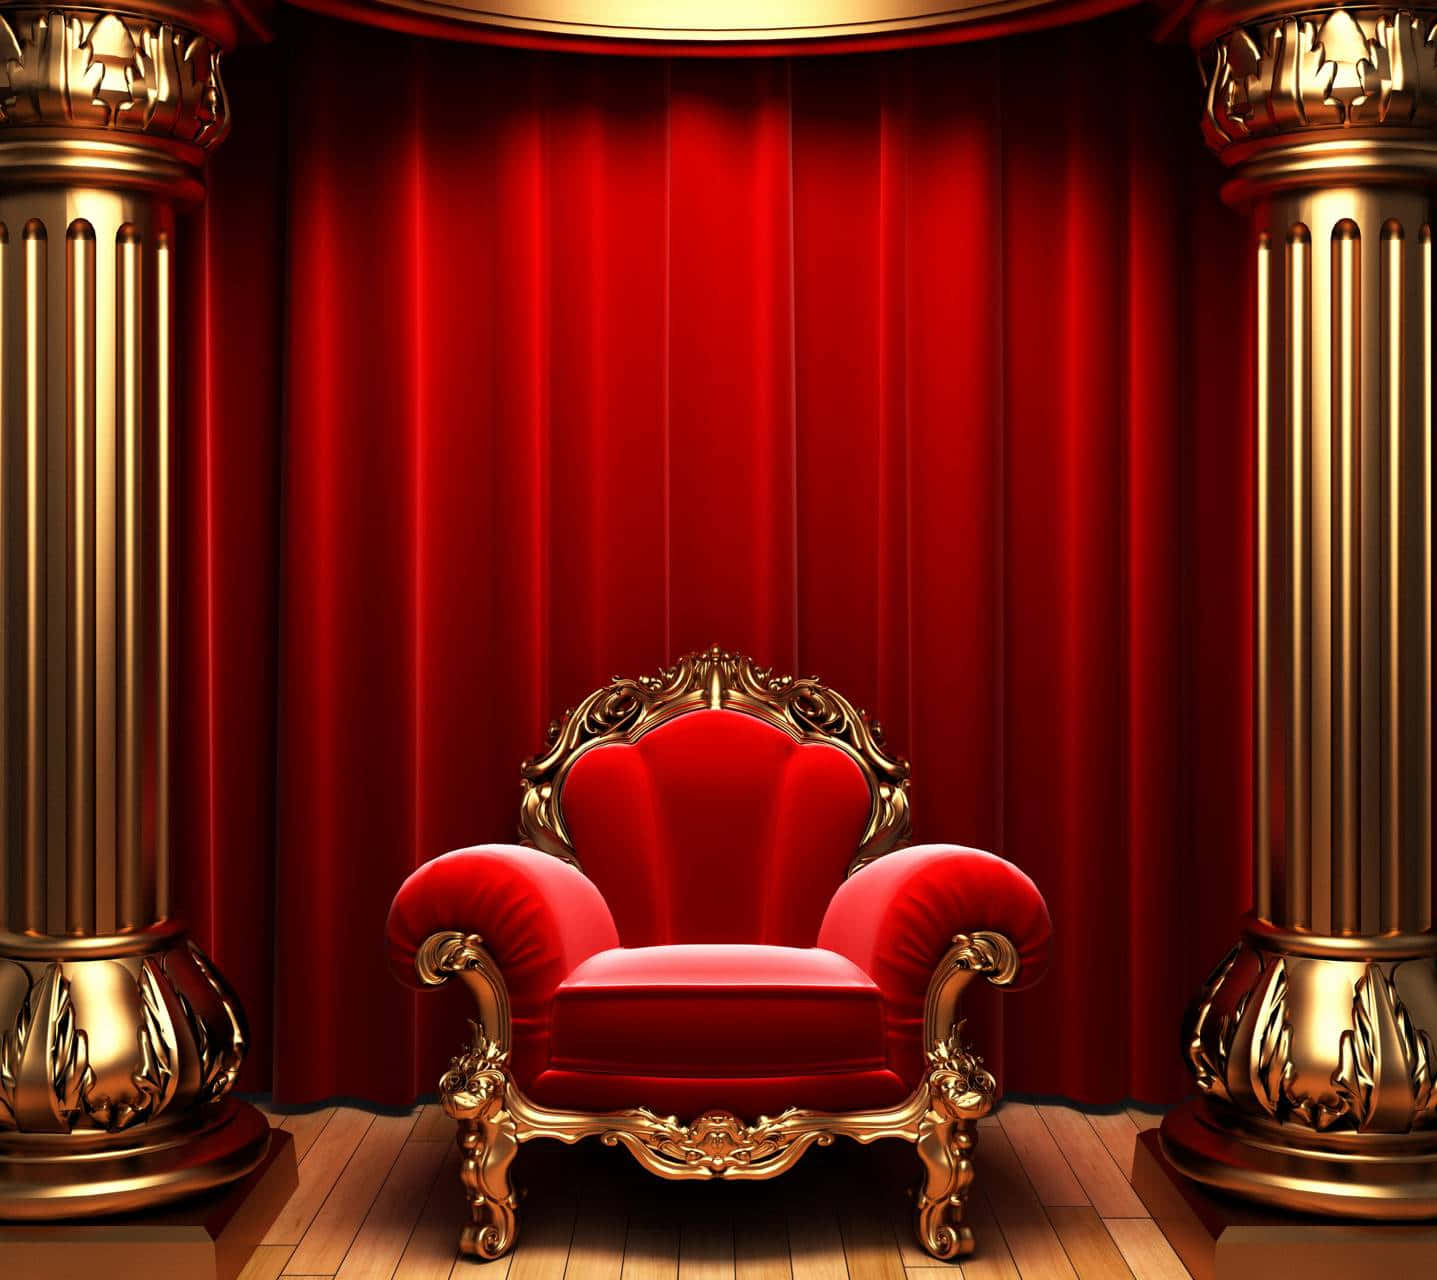 Red And Gold Royal Chair Wallpaper